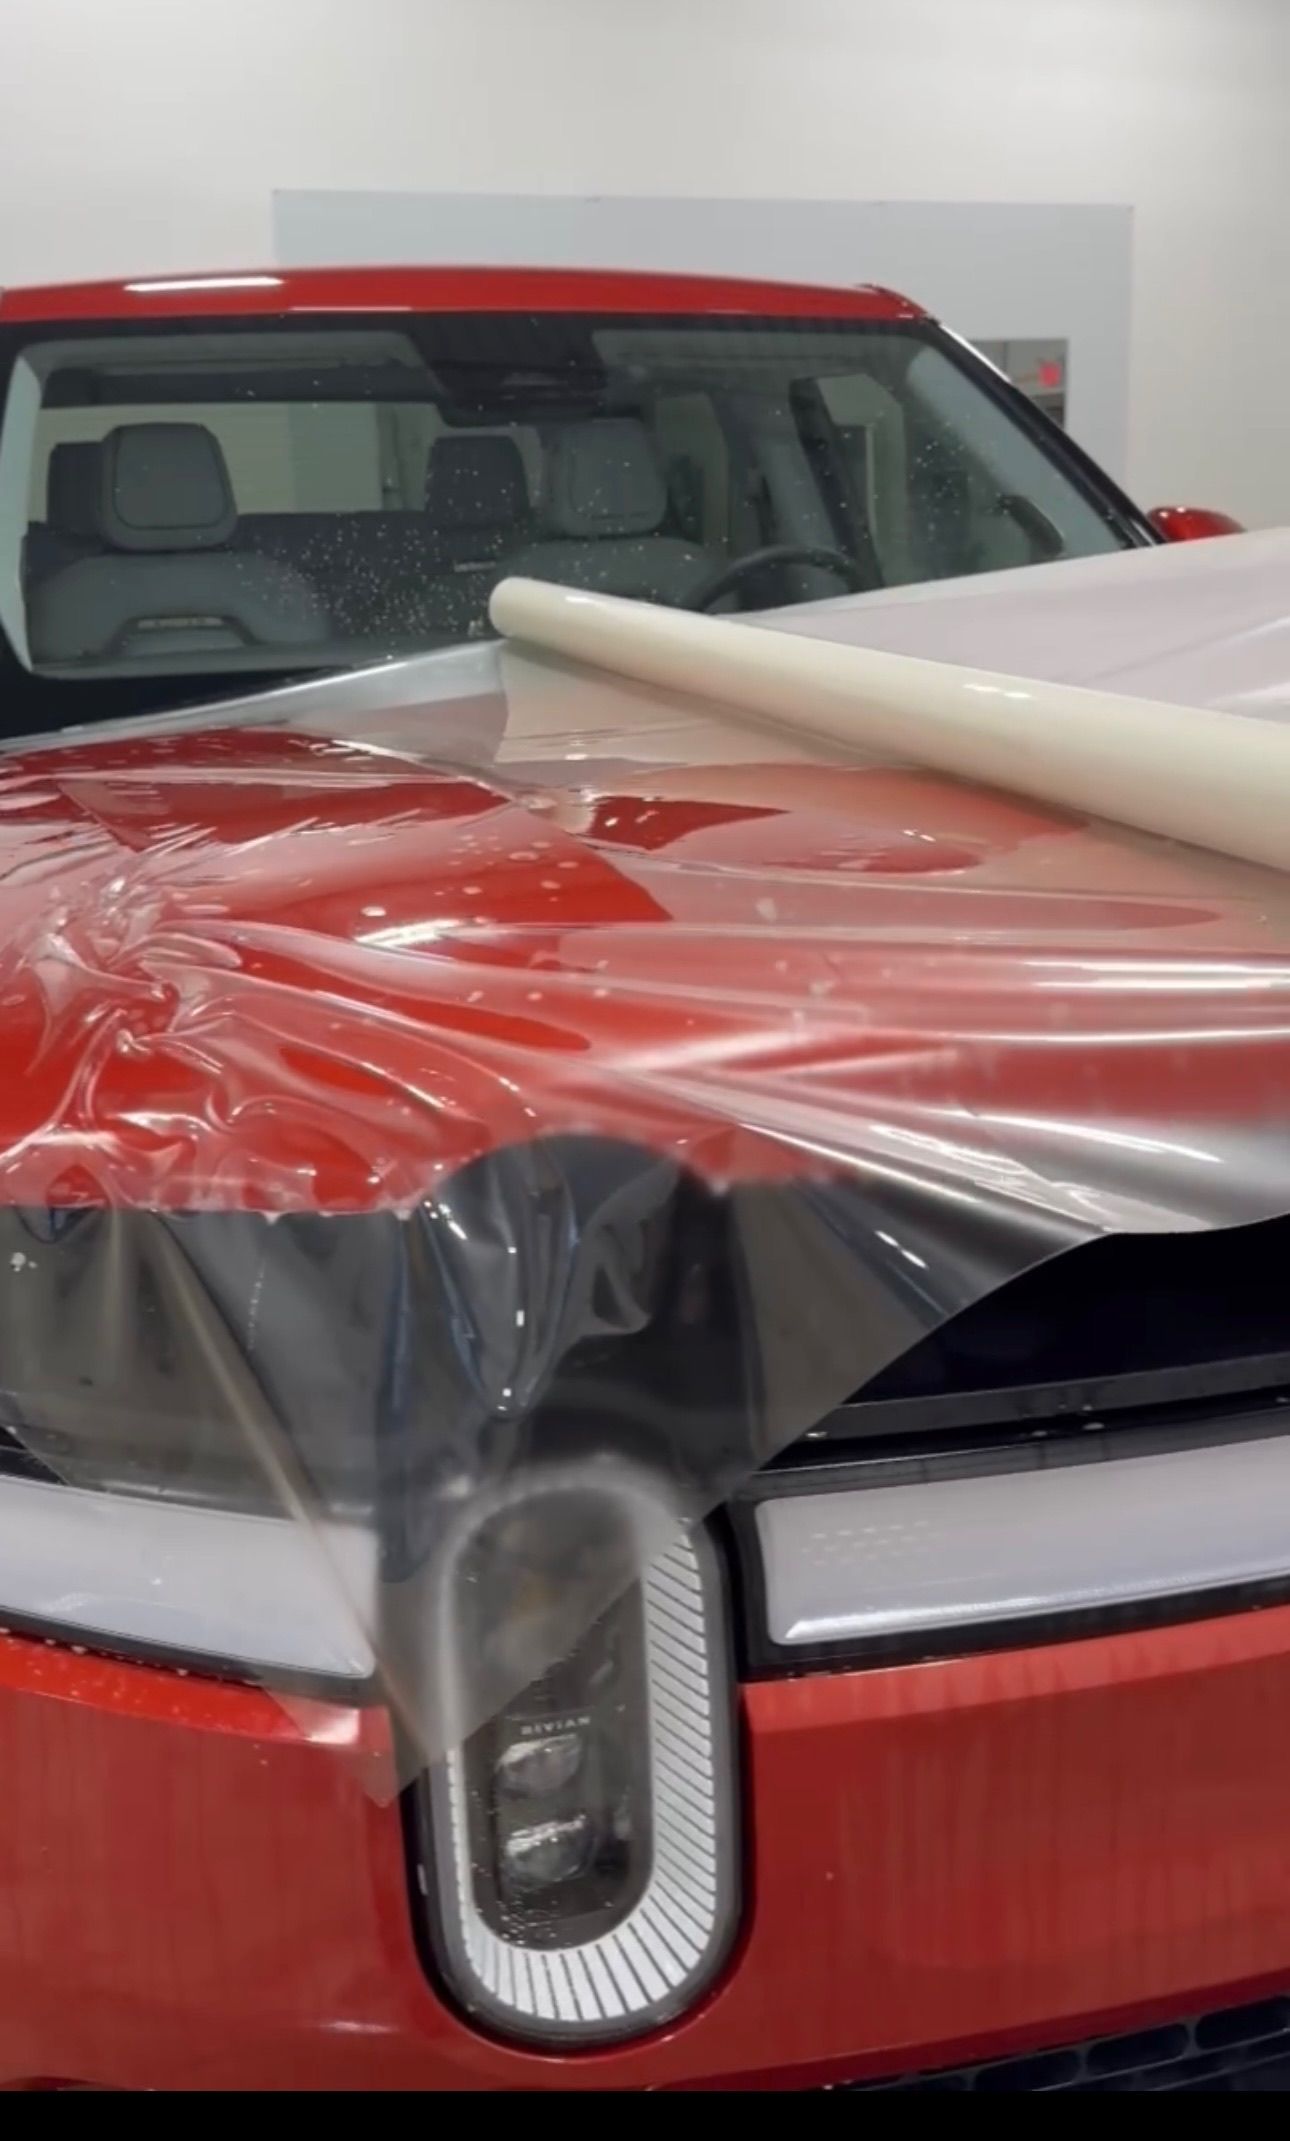 a red car is covered in plastic wrap in a garage .